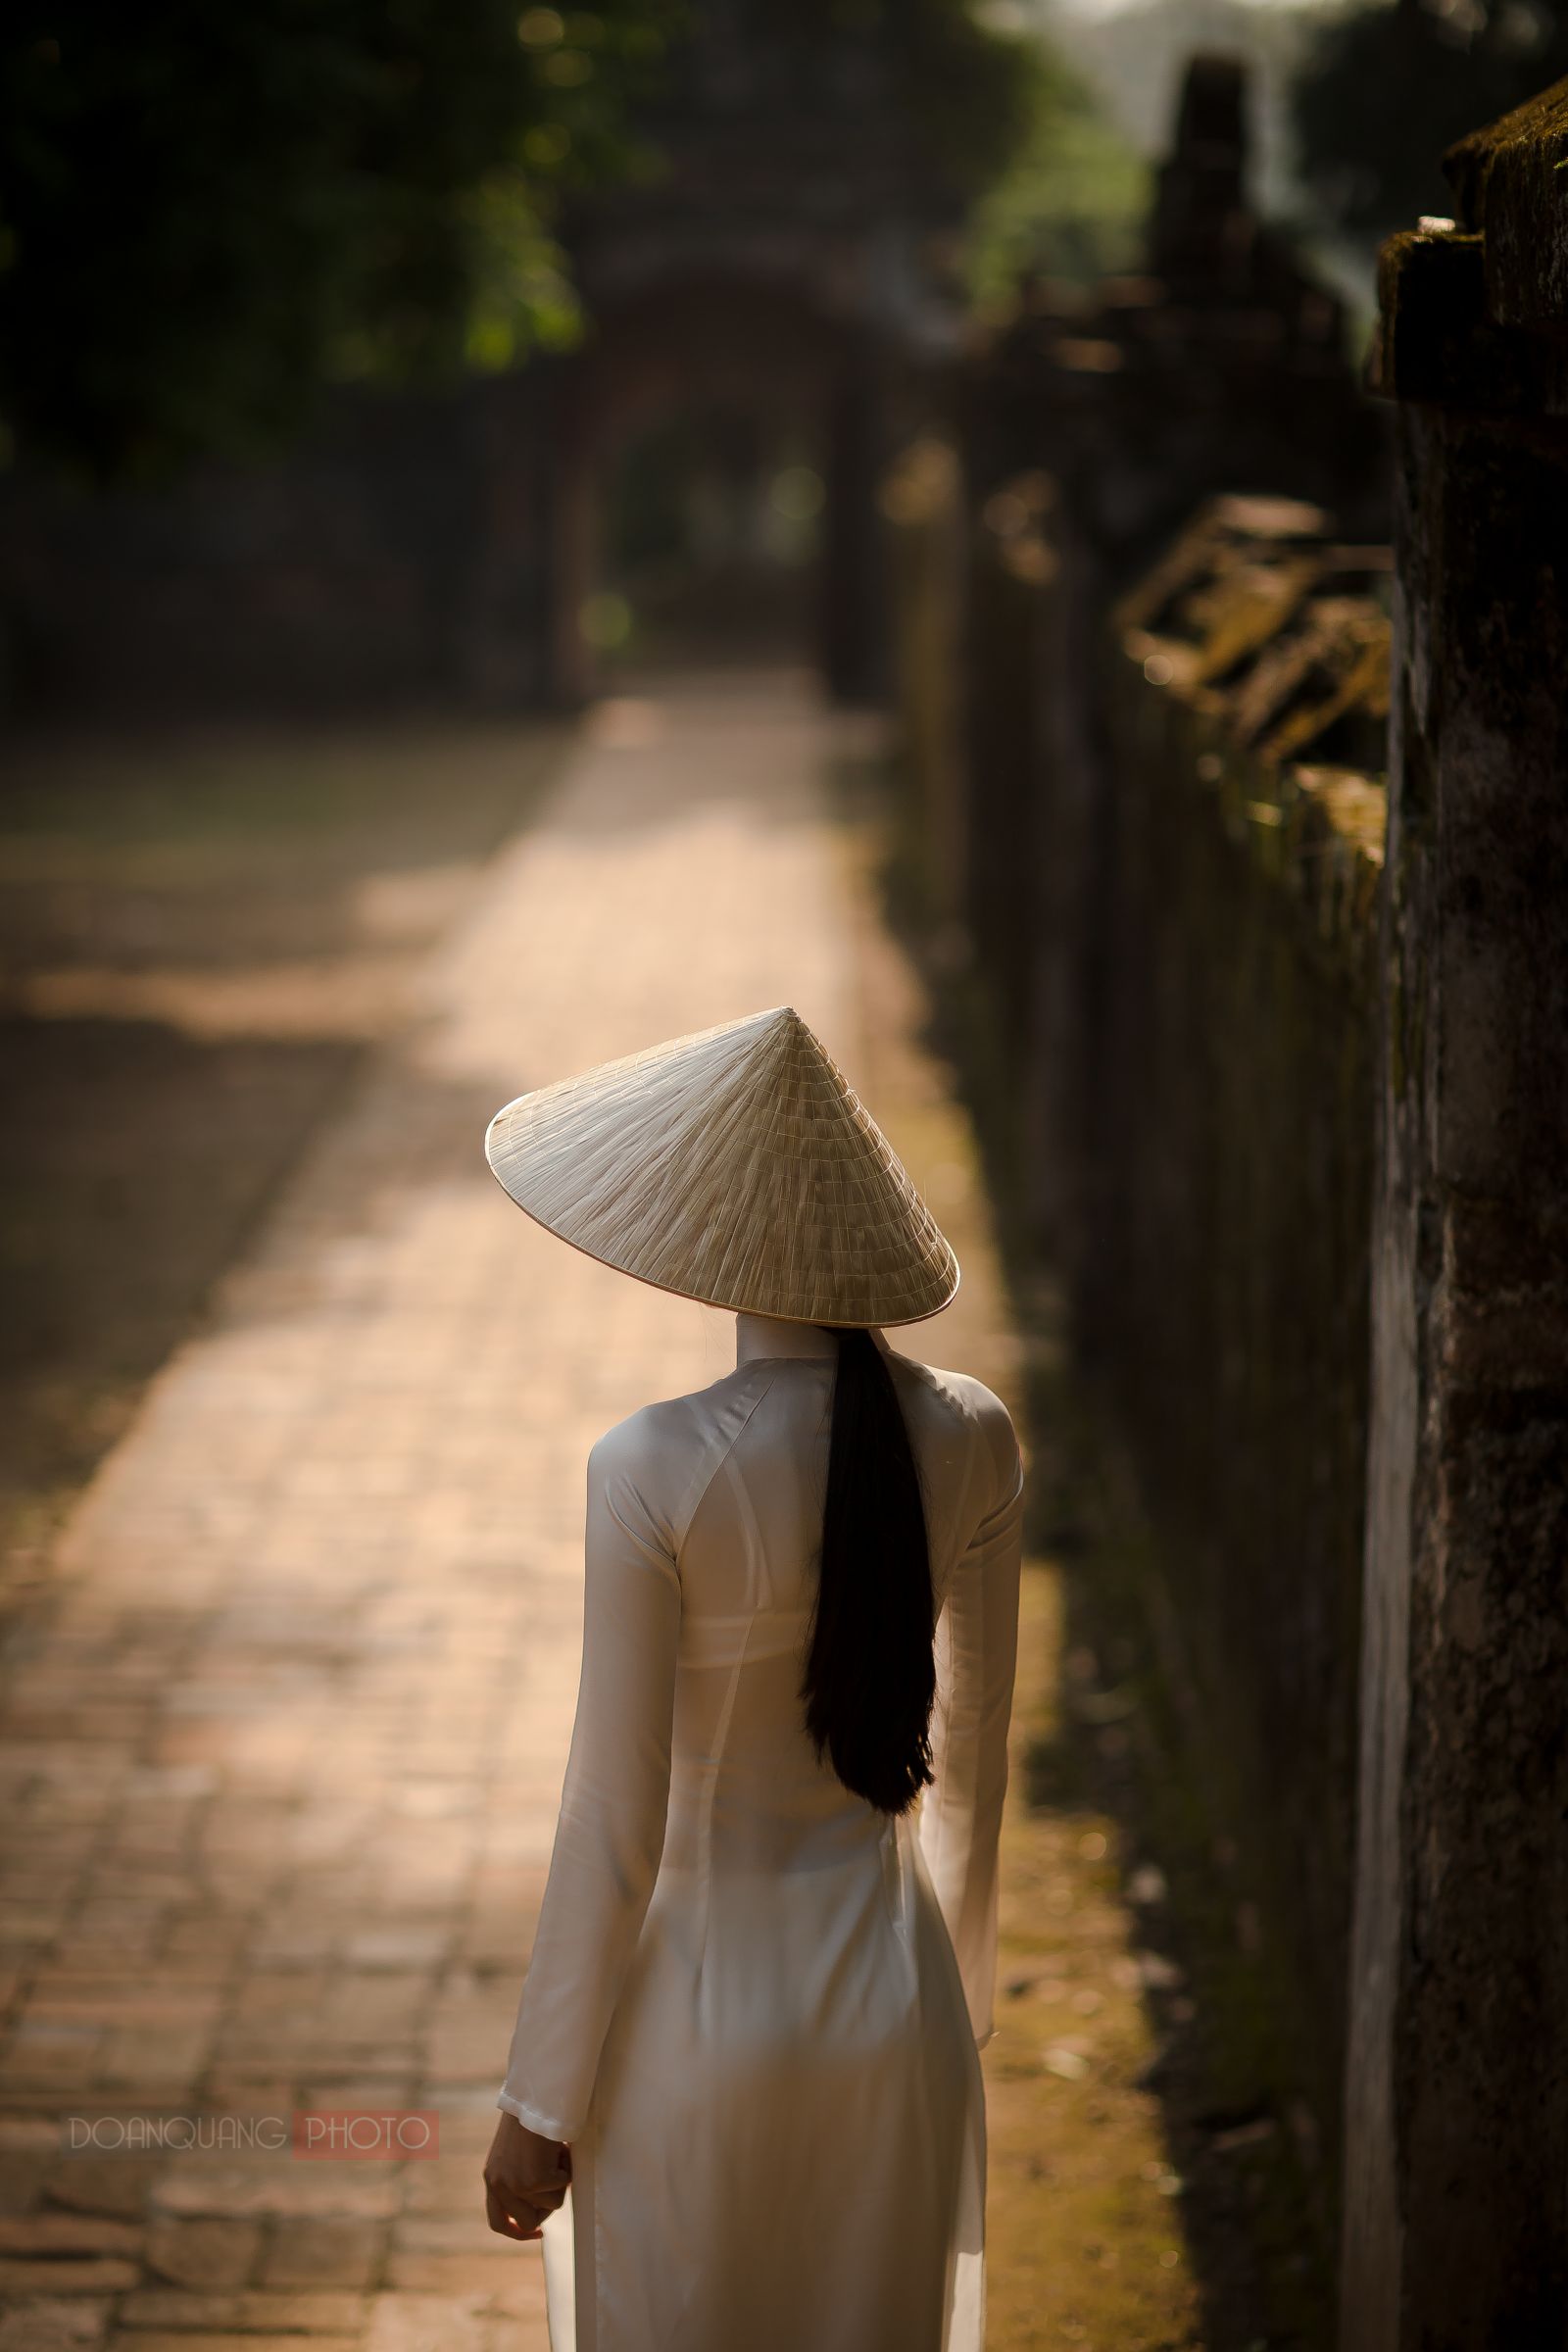 The figure of a girl in ao dai